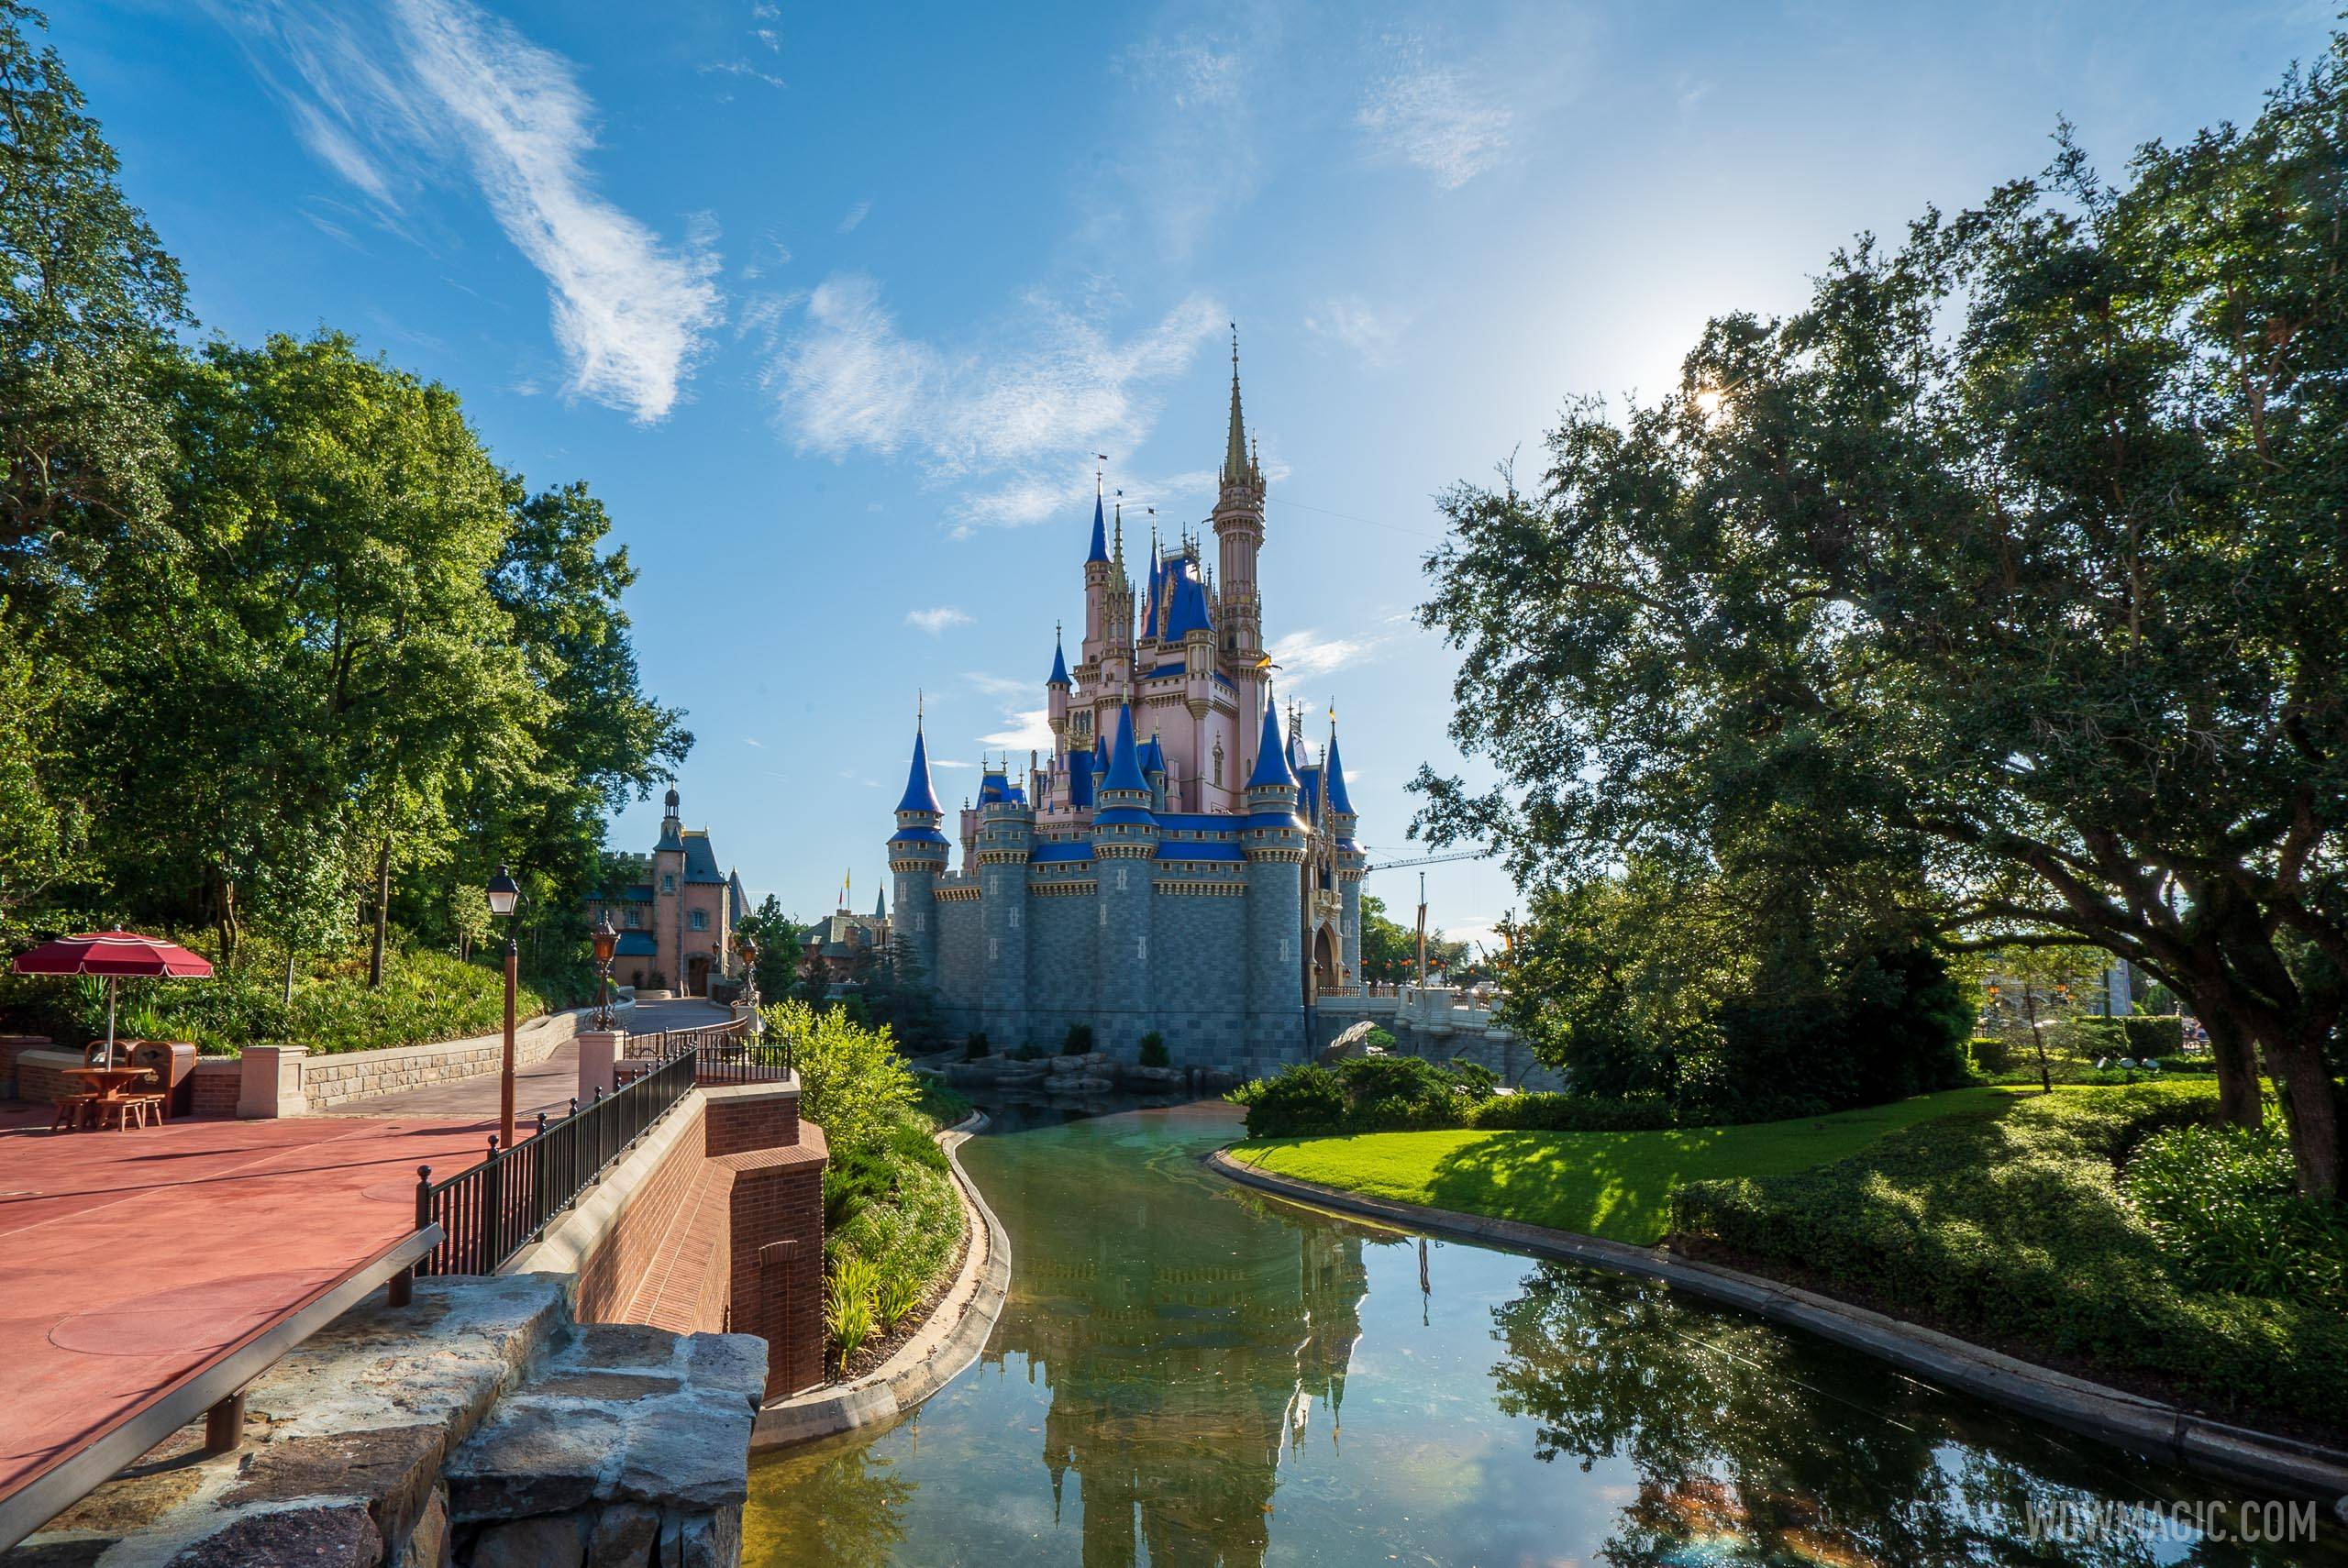 The Magic Kingdom will close at 6pm in the first week of November